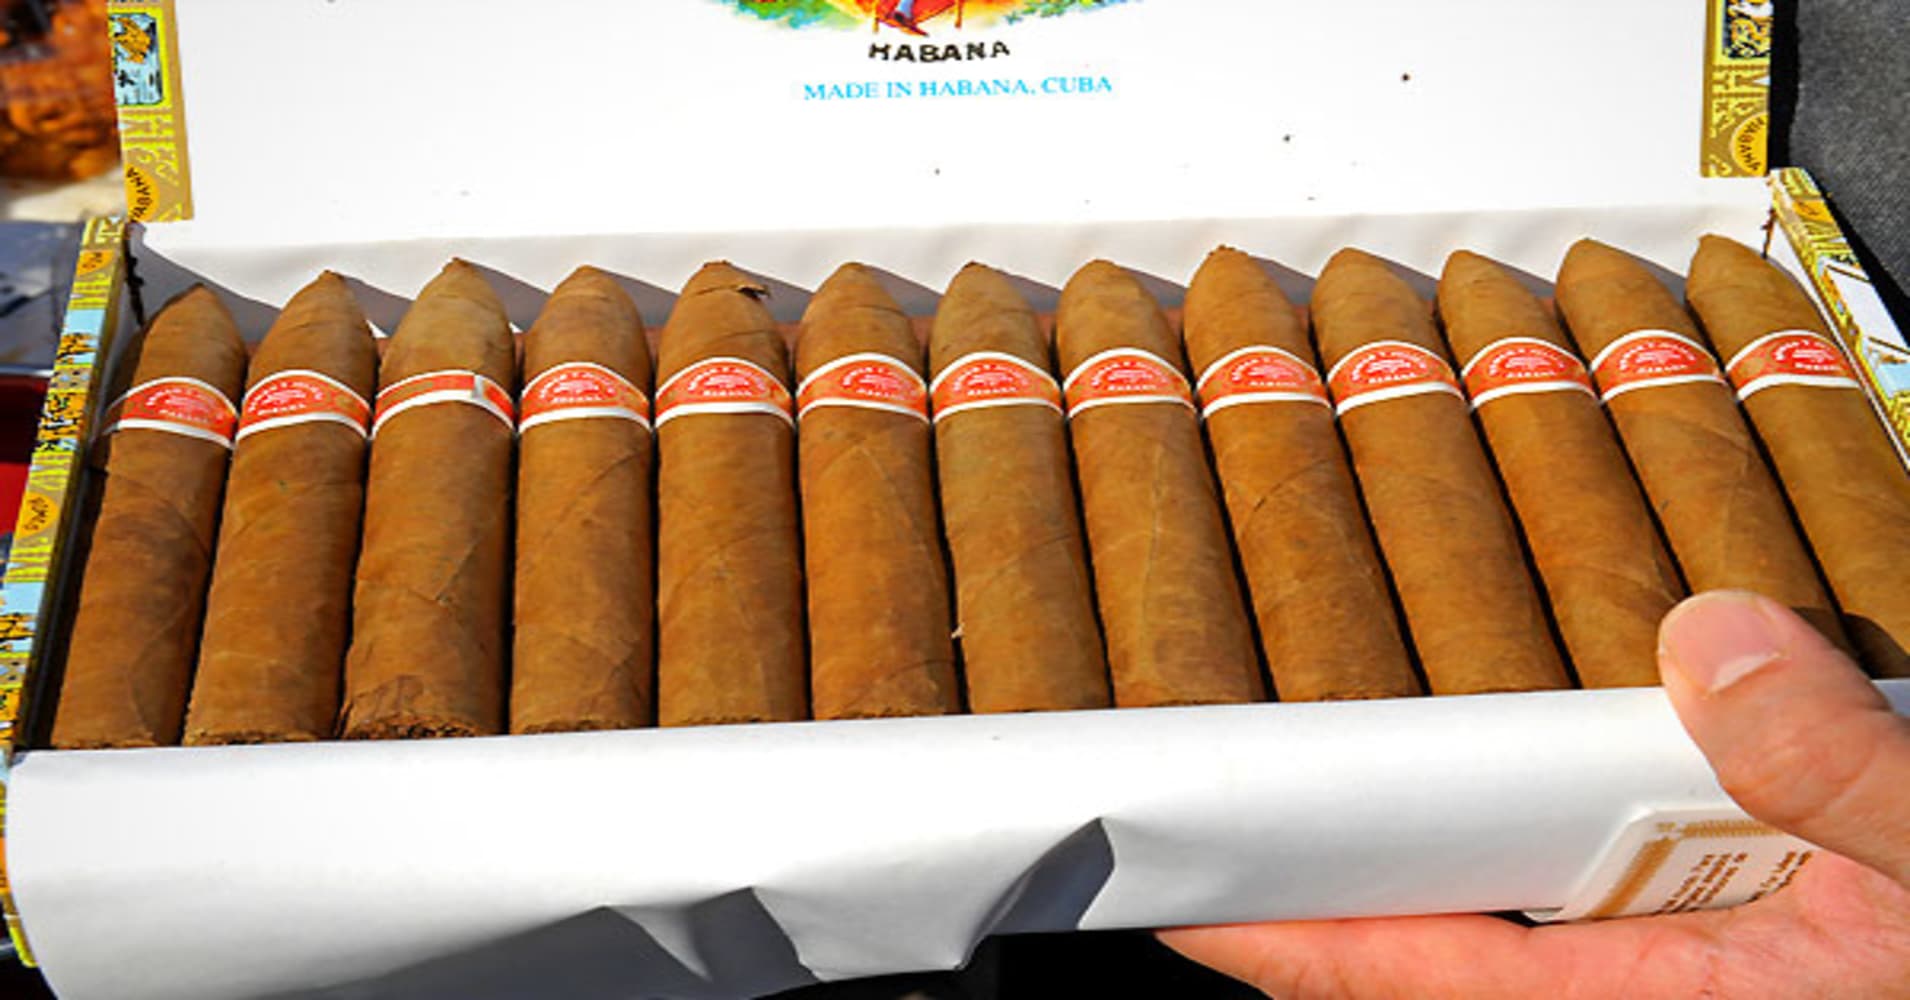 In February1962, President John F. Kennedy imposed a trade embargo against Cuba and ever since American cigar enthusiasts have had to be satisfied with American stogies or those of her allies. According to most cigar enthusiasts, however, almost any cigar grown outside of Cuba is a pale substitute for the real thing.Pierre Salinger, who served as Kennedy’s press secretary at the time, claimed that the president ordered him to procure  one day prior to putting the embargo into effect. Almost 50 y